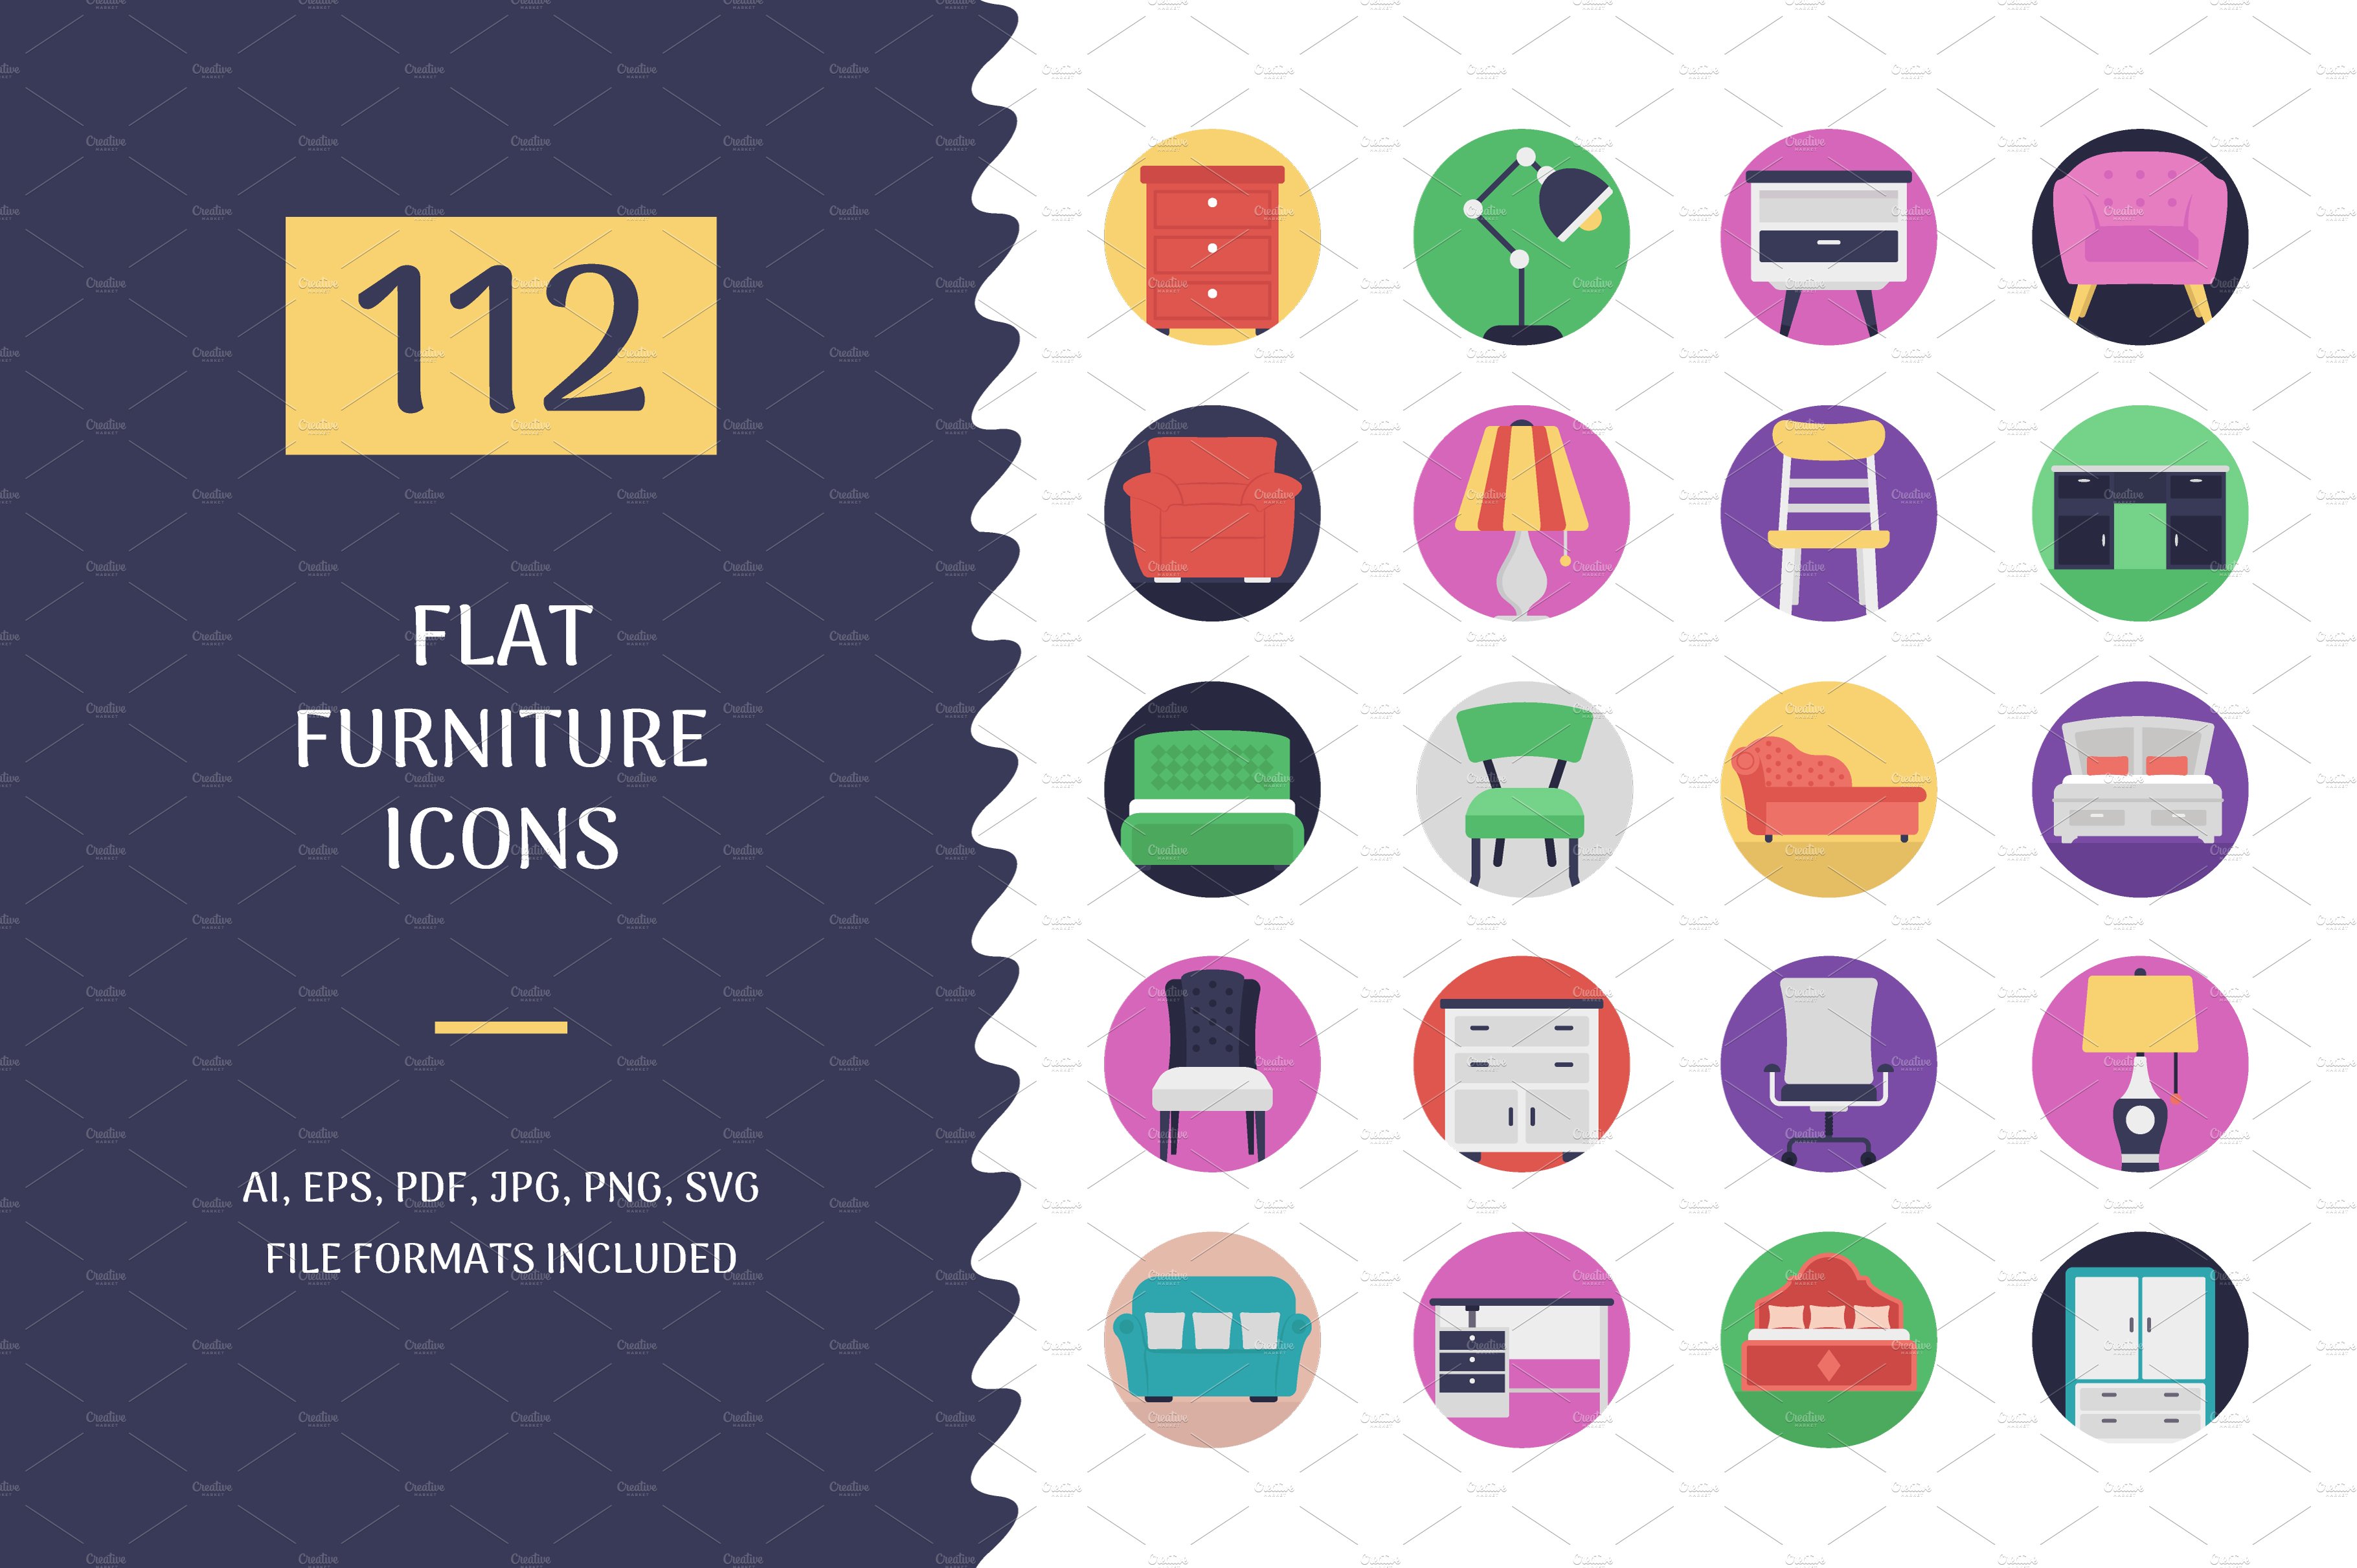 112 Flat Furniture Vector Icons cover image.